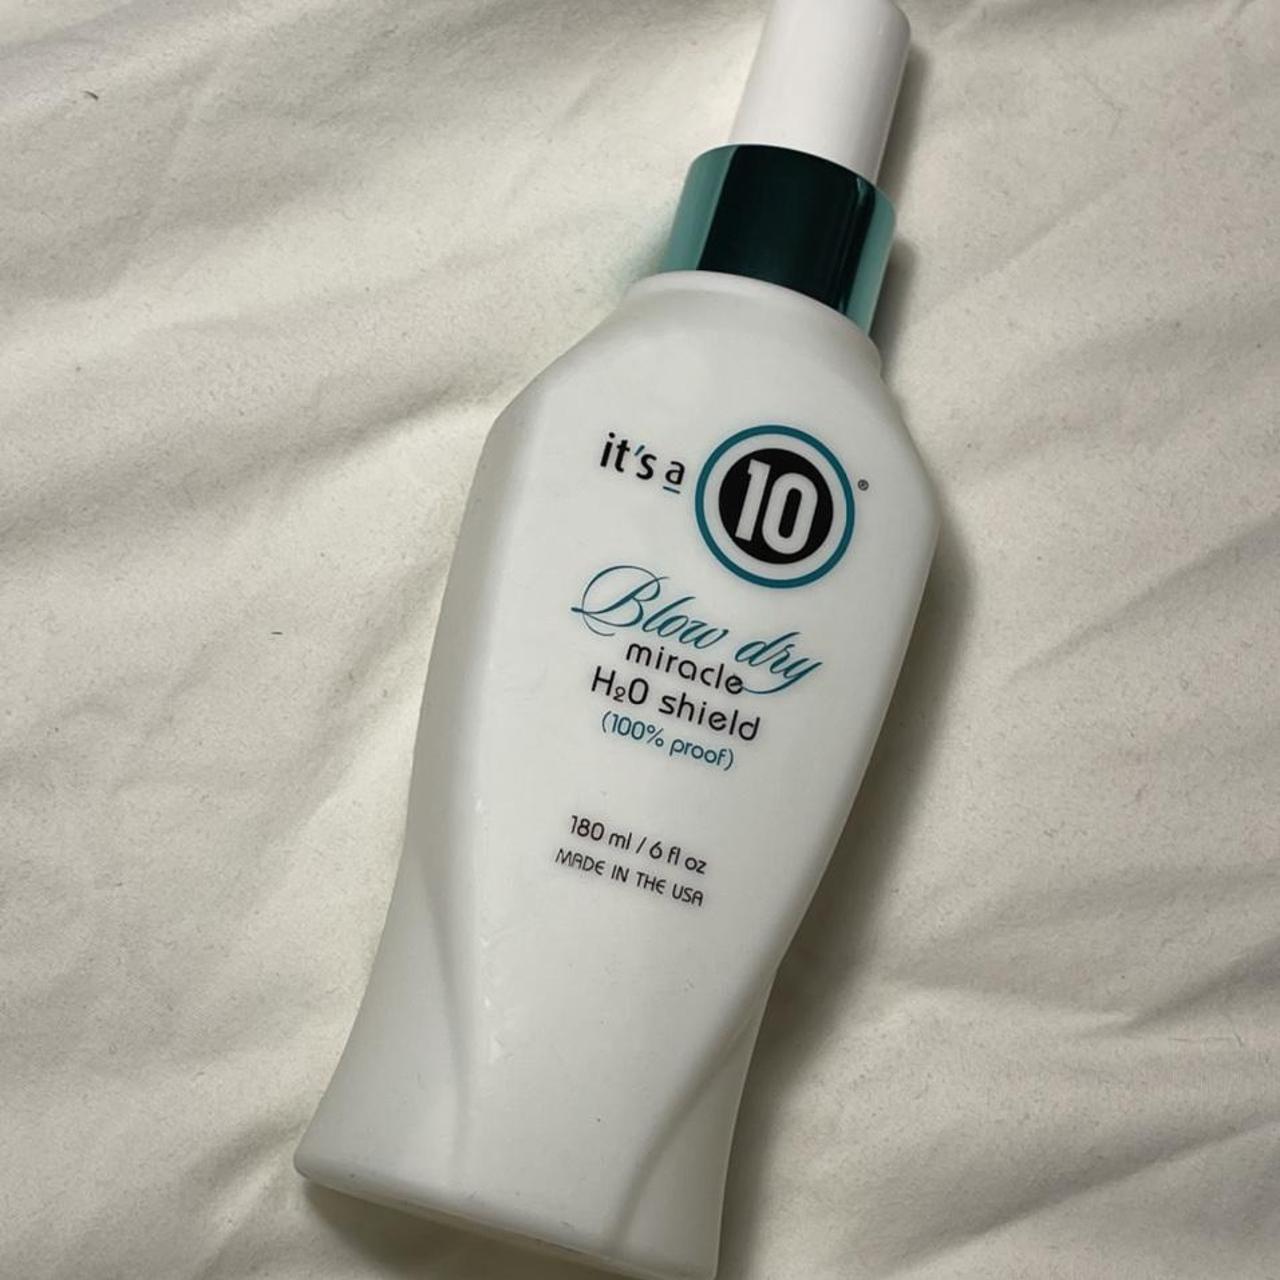 It's A 10 Blow Dry H2O Shield, Miracle - 180 ml